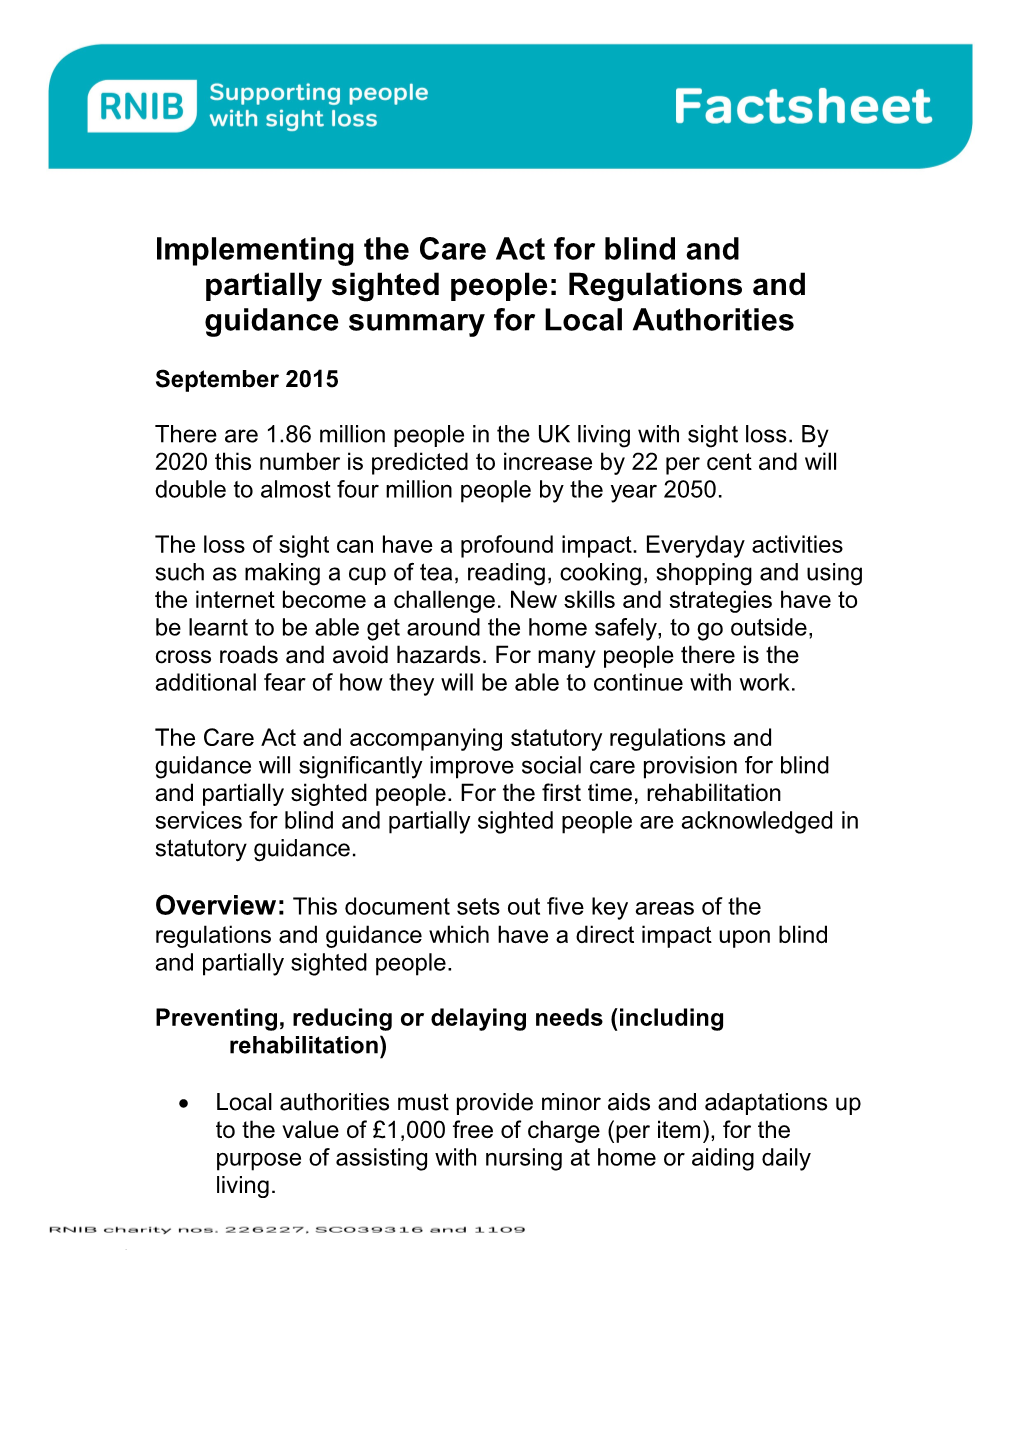 Implementing the Care Act for Blind and Partially Sighted People: Regulations and Guidance